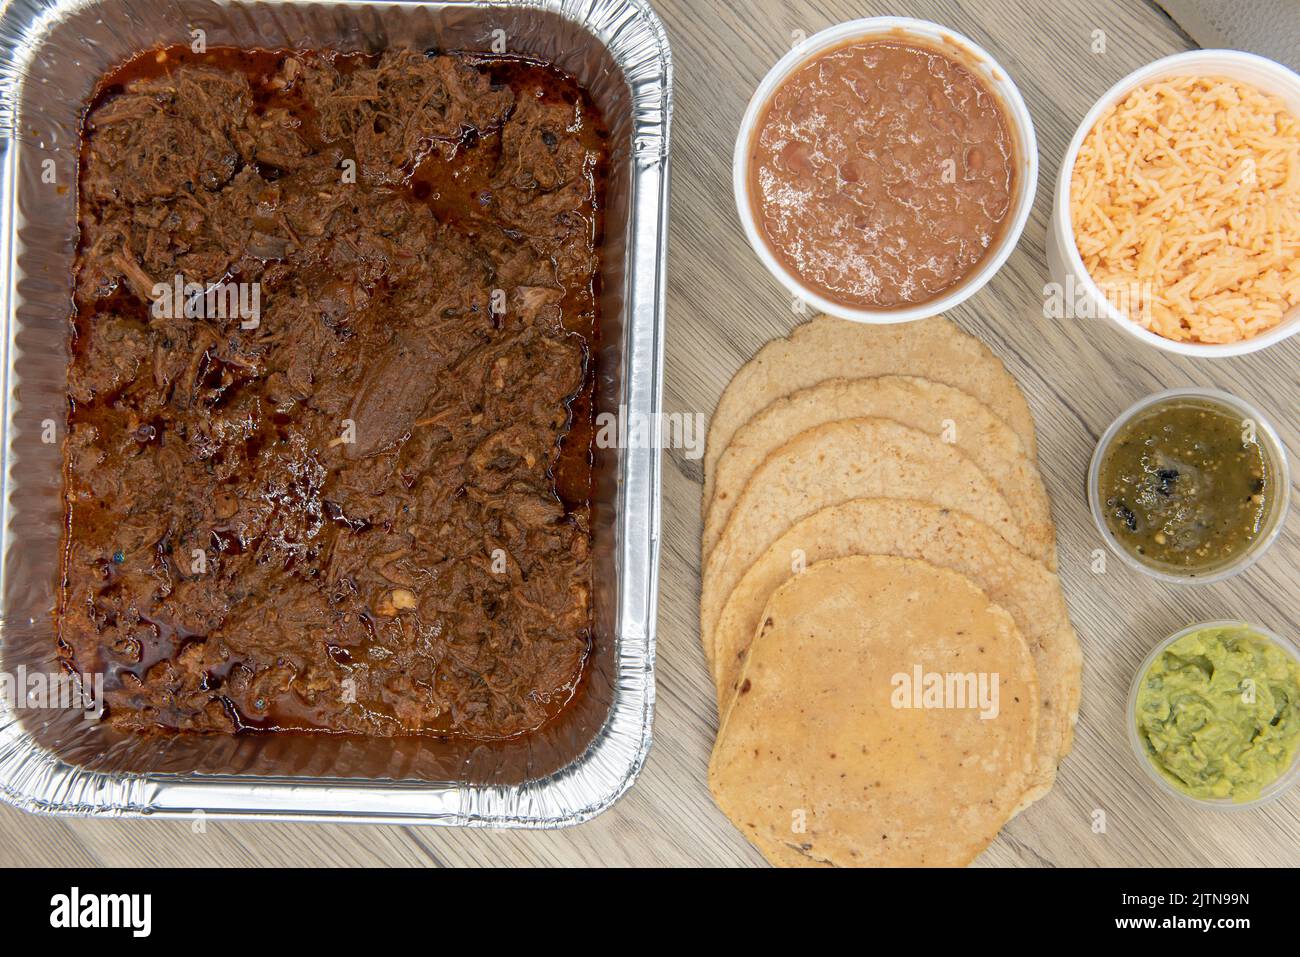 Overhead view of family sized Mexican food meal comes with slow cooked birria, homemade tortillas, rice, beans, salsa, and limes to feed everyone. Stock Photo